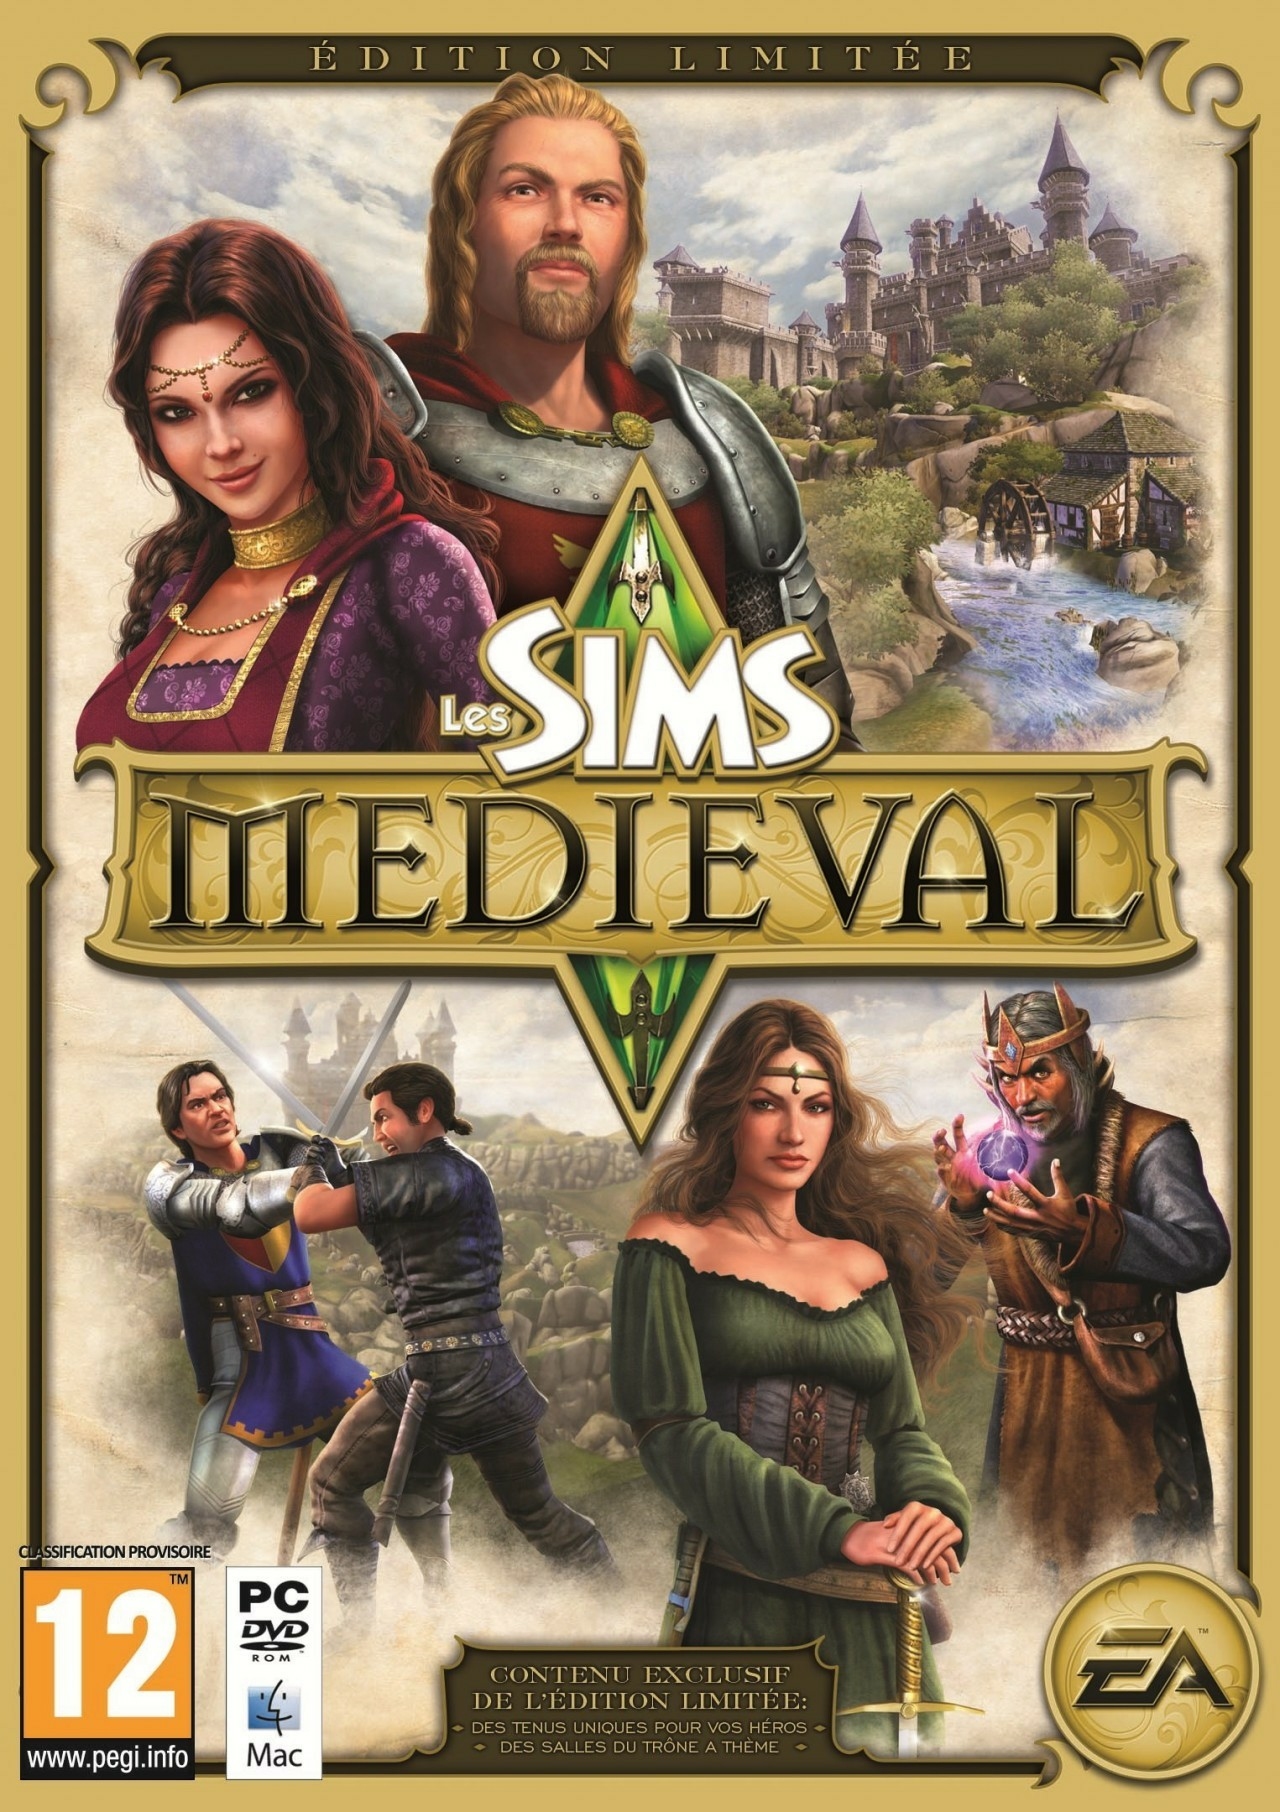 the sims medieval pc free download